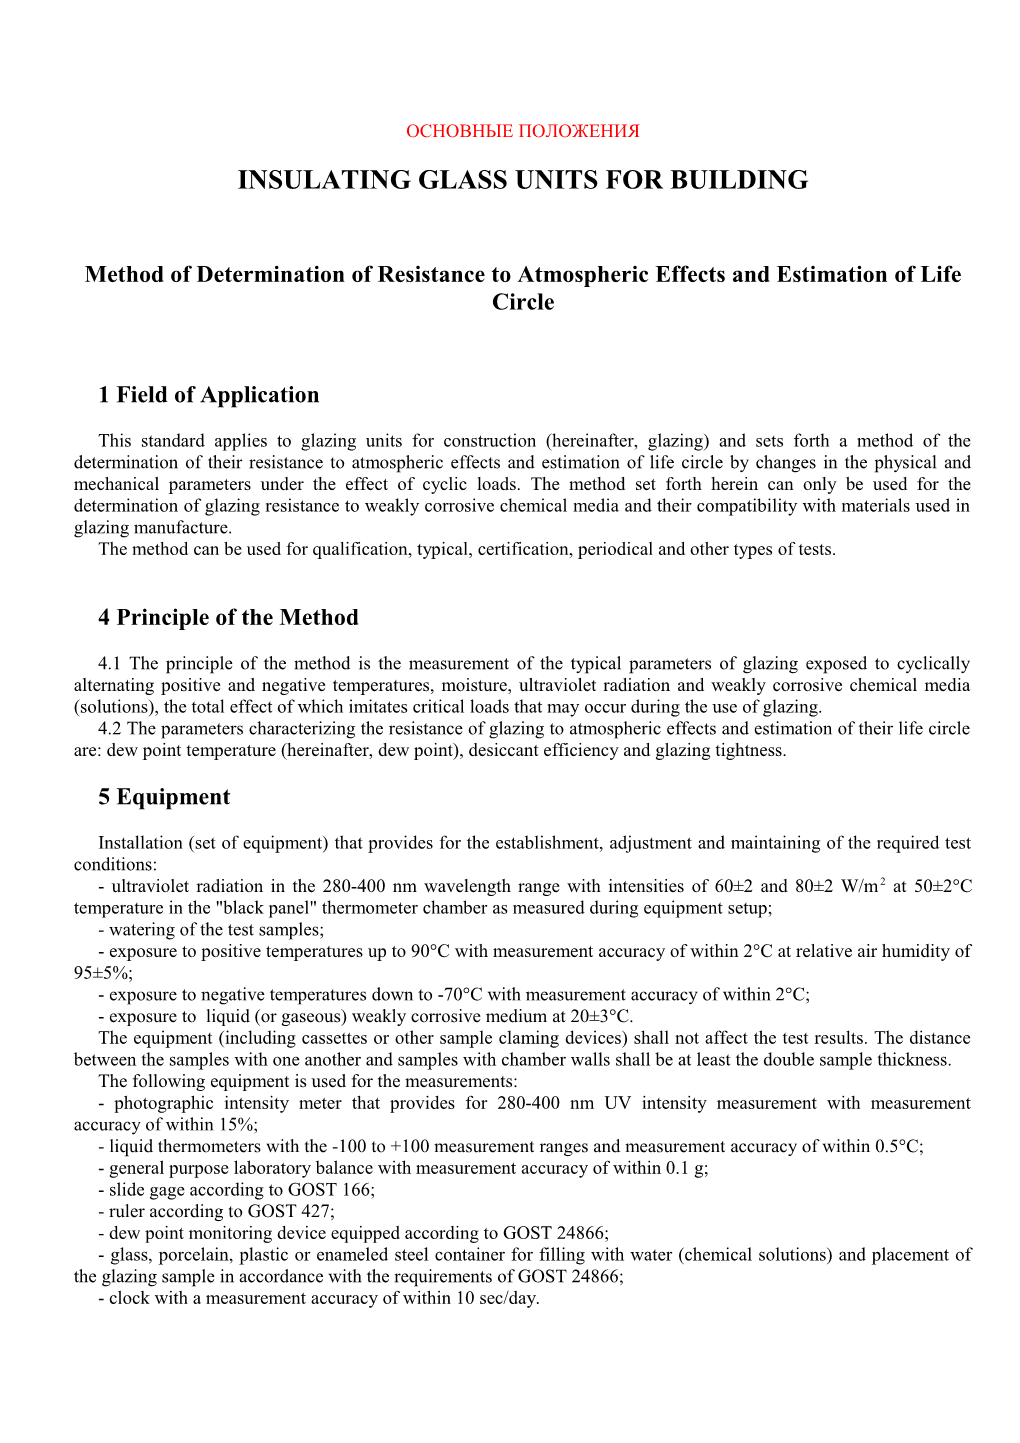 Method of Determination of Resistance to Atmospheric Effects and Estimation of Life Circle